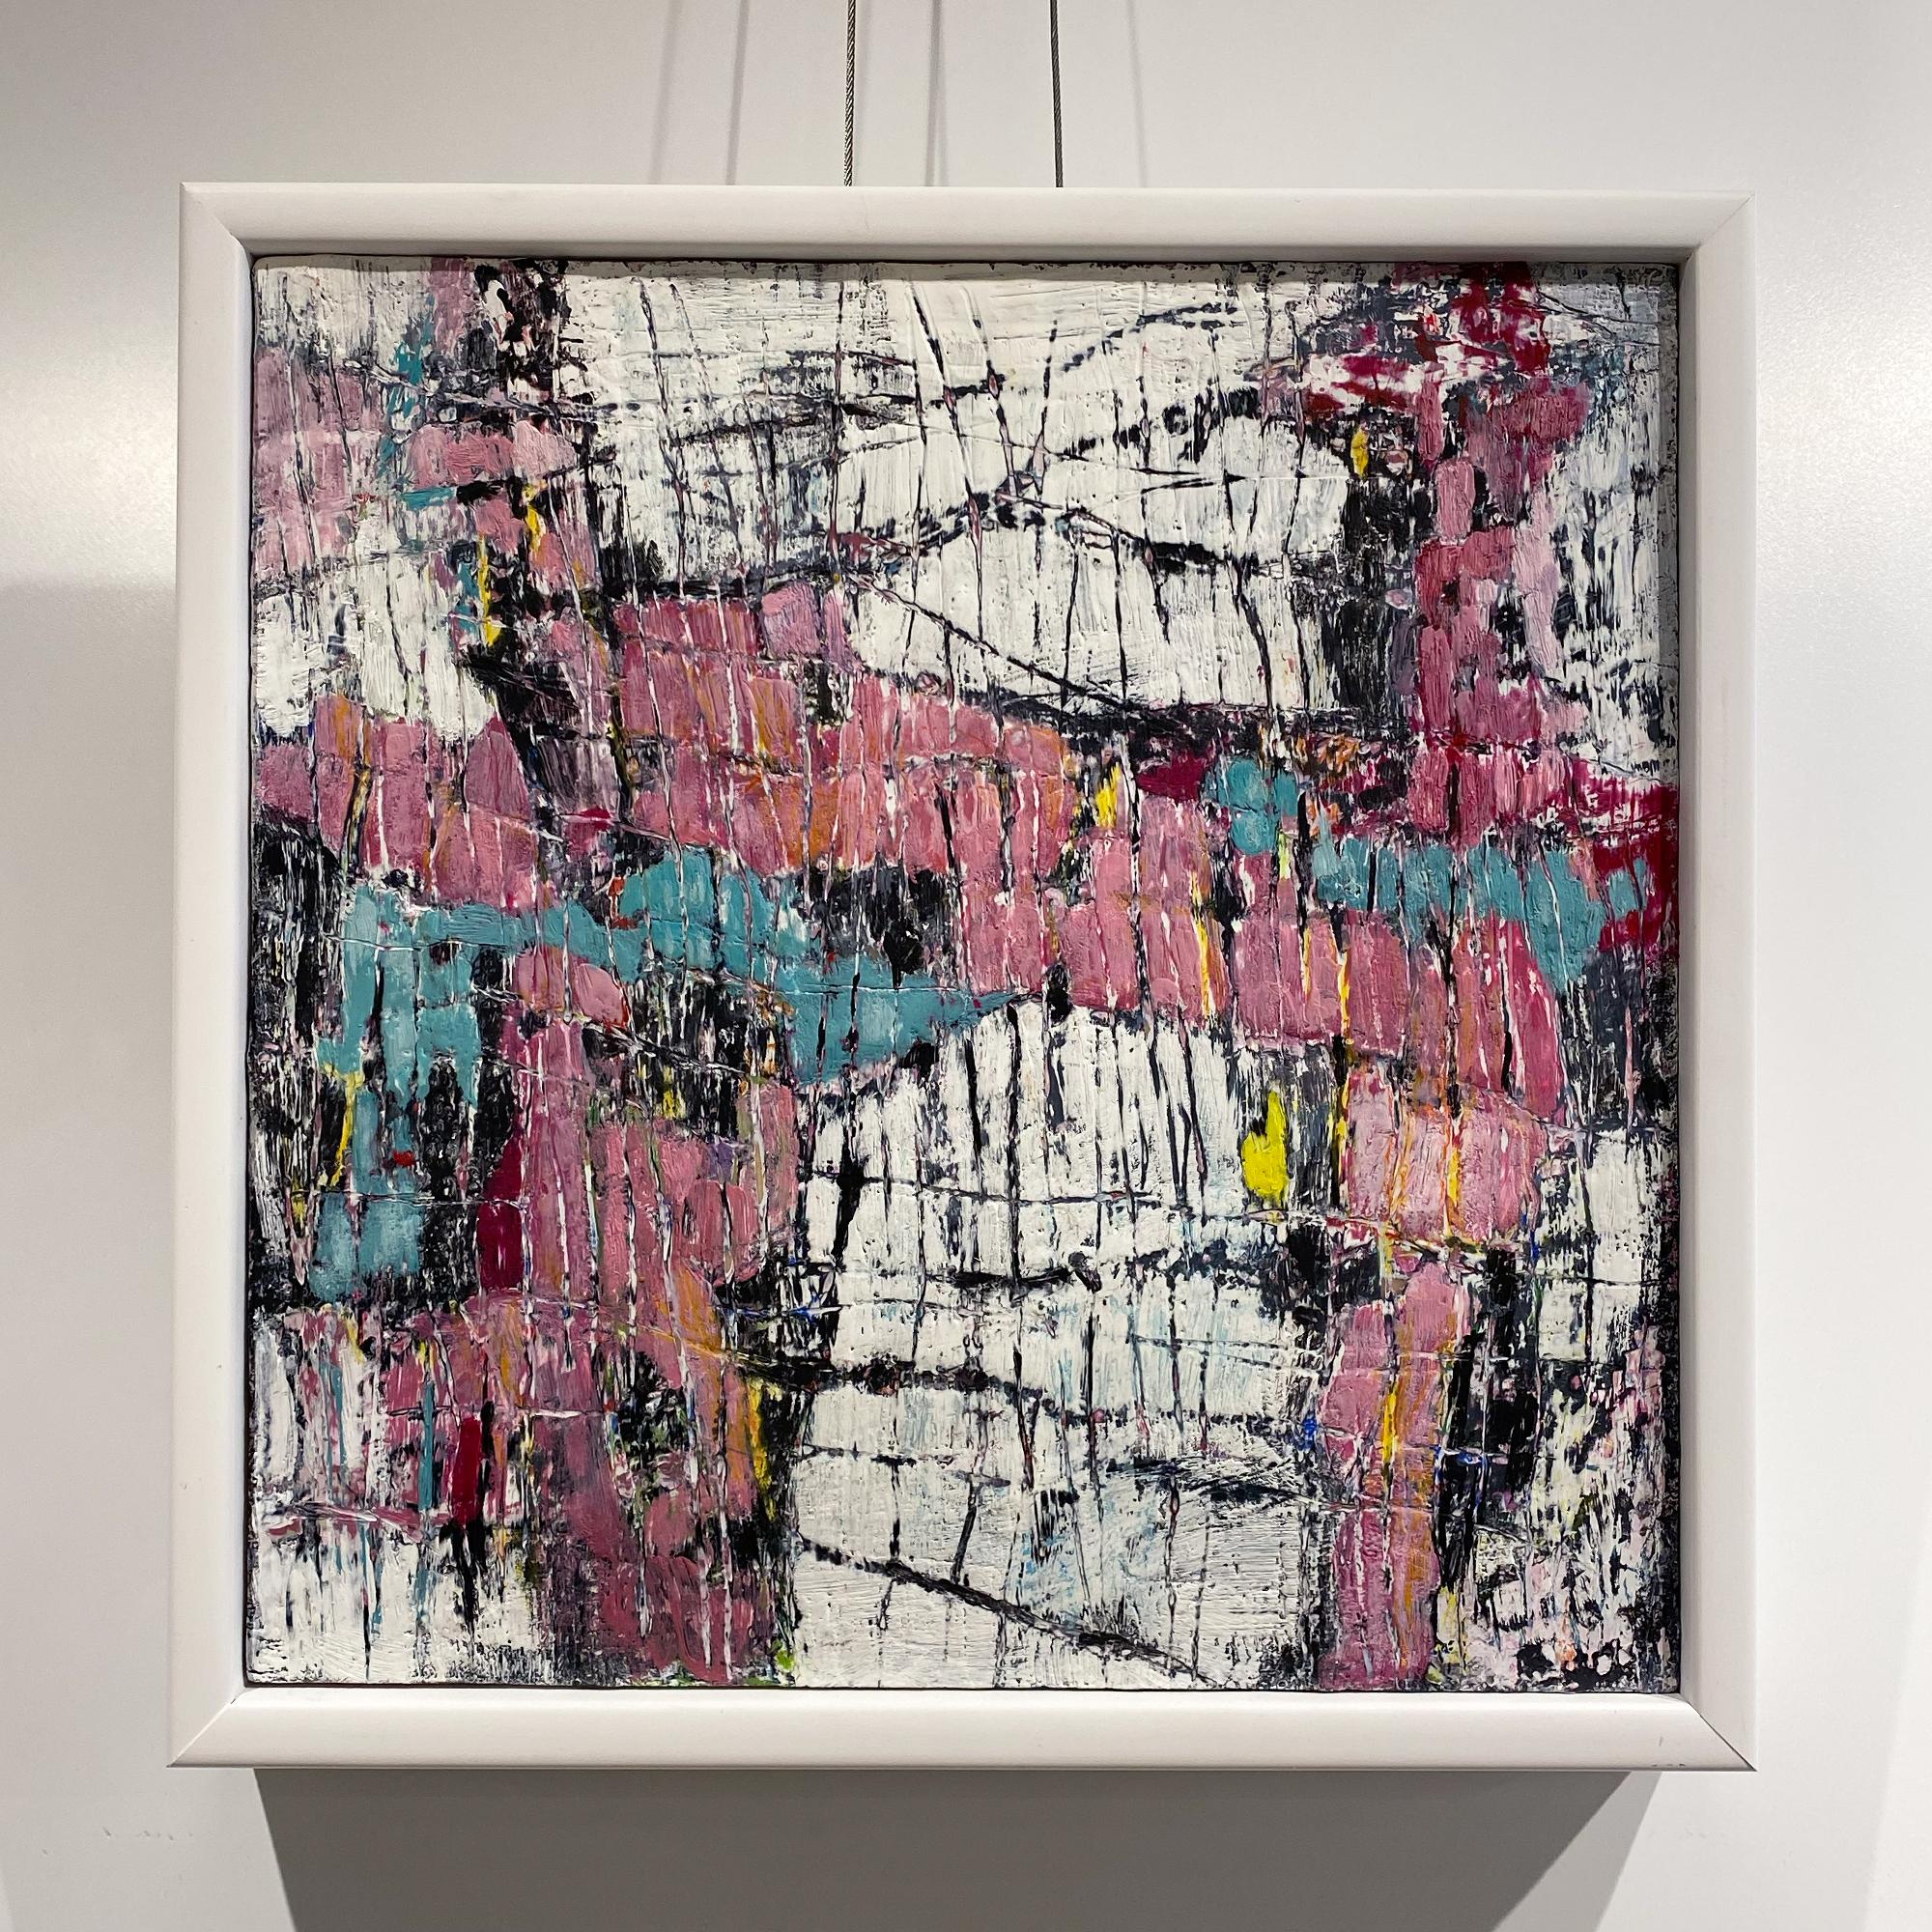 Study for Venus, pink, turquoise, and white encaustic wax abstract painting - Art by Anastessia Bettas